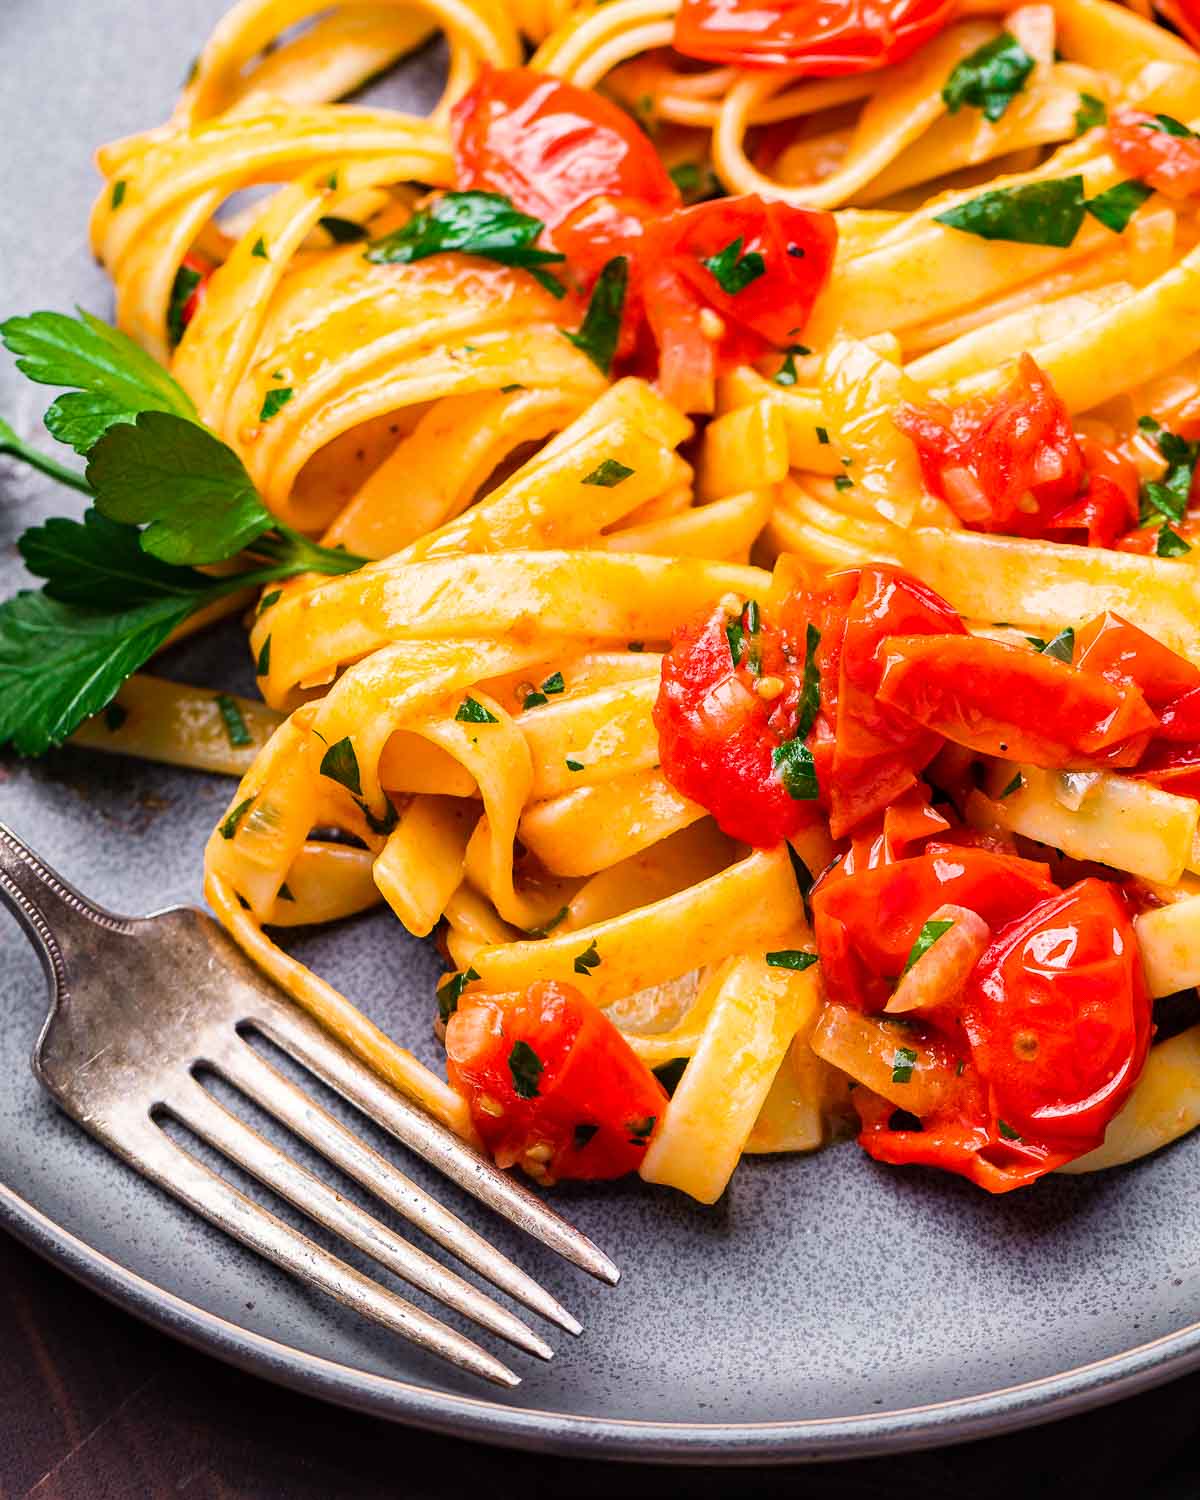 Fettuccine with cherry tomato butter sauce in grey plate.